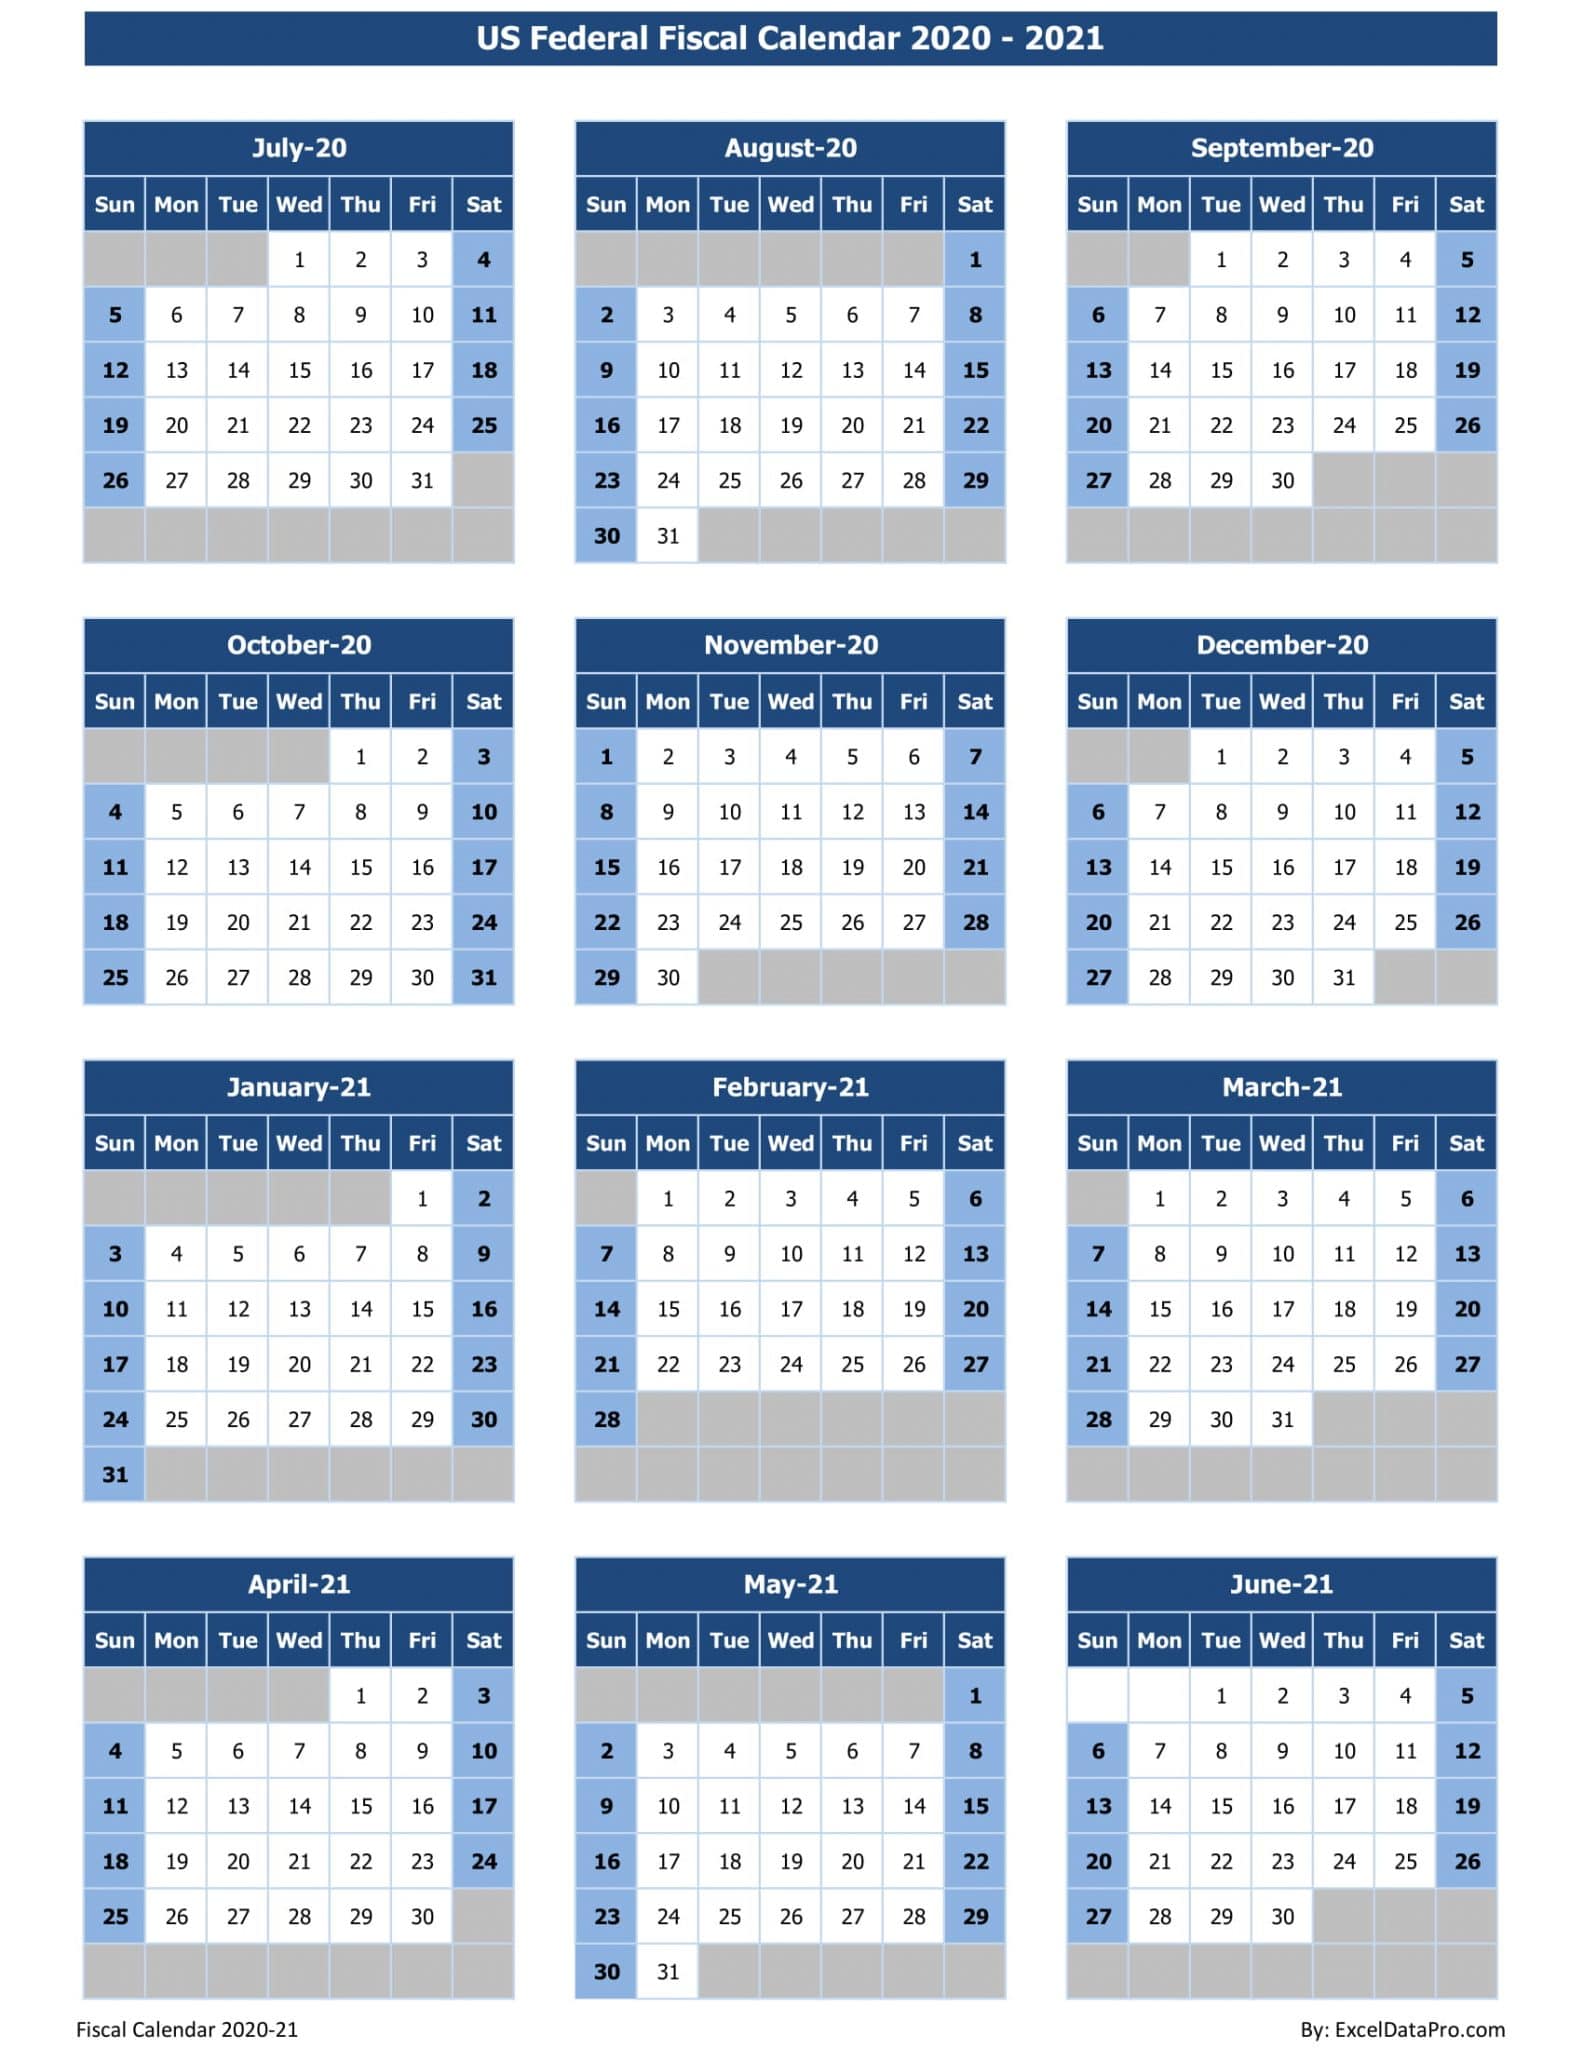 download us federal fiscal calendar 2020 21 excel template exceldatapro